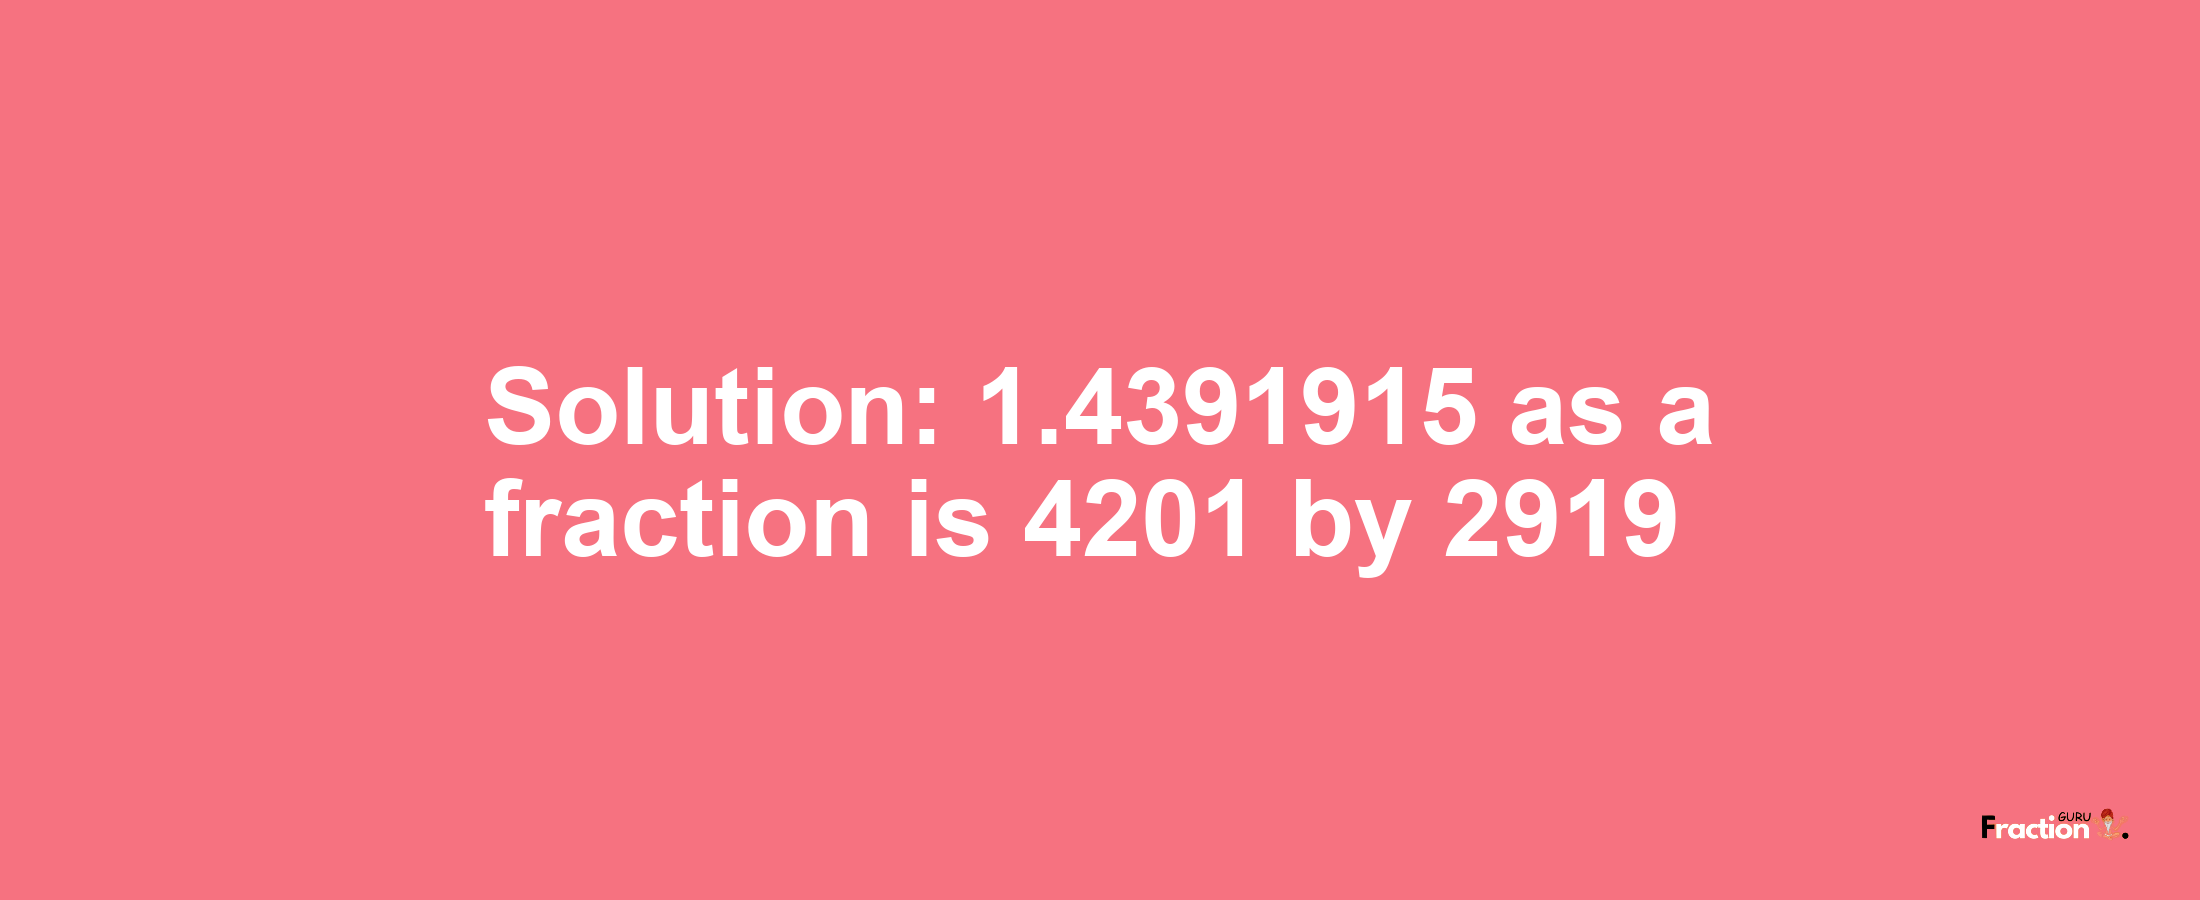 Solution:1.4391915 as a fraction is 4201/2919